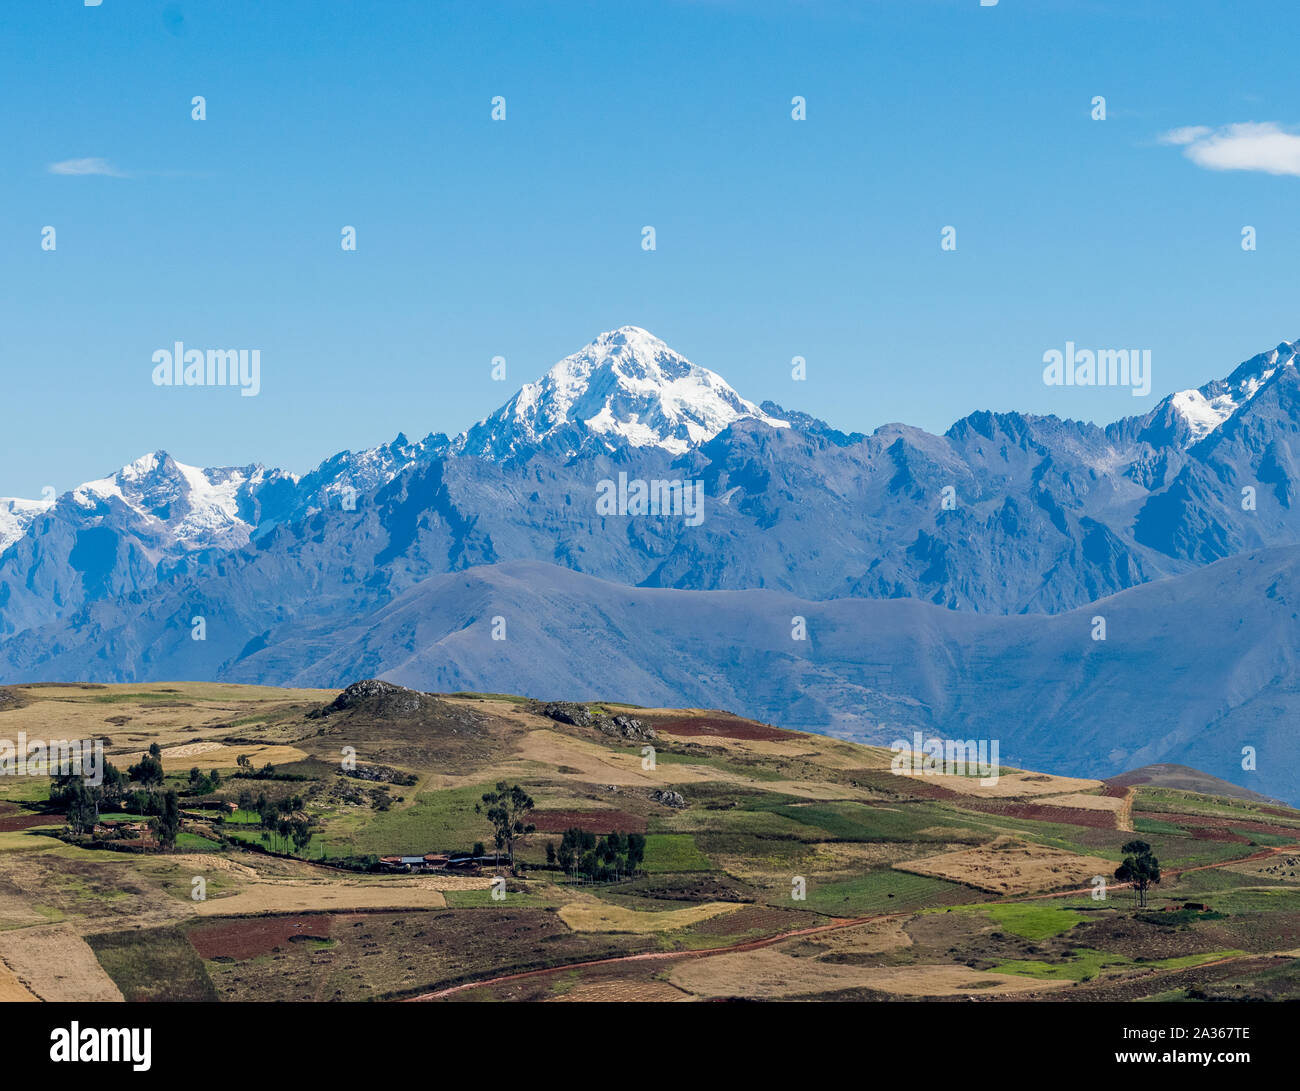 Sacred Valley, Peru - 05/21/2019: The inescapable snow peaked Andes in the Sacred Valley of Peru. Stock Photo